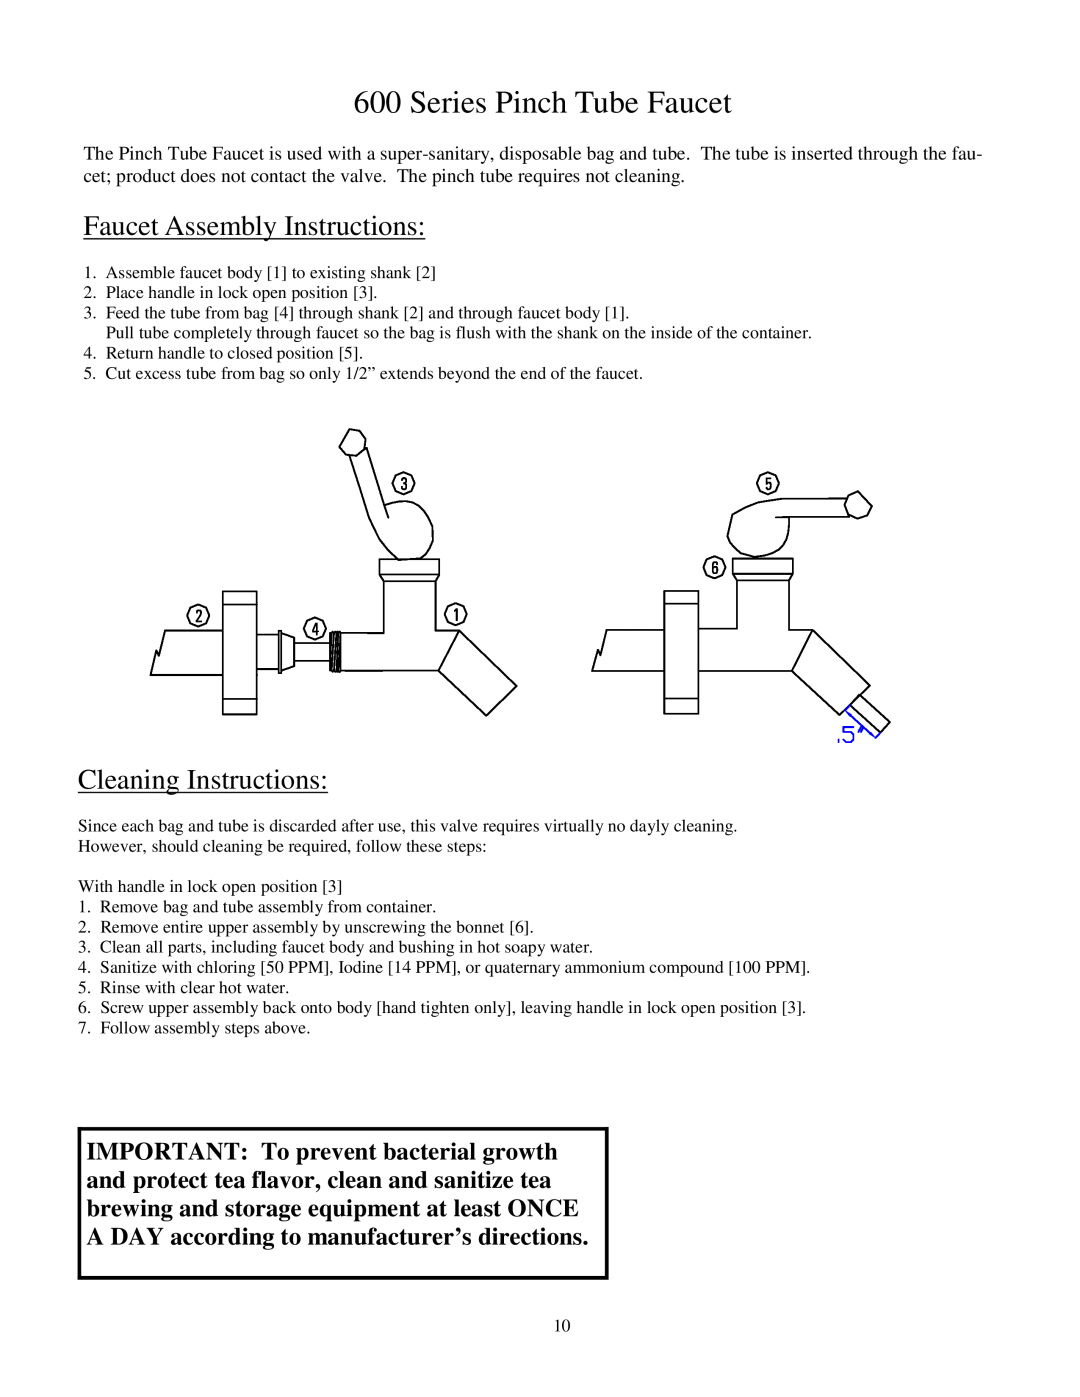 Cecilware FTC-5, FTC-10 manual Series Pinch Tube Faucet, Faucet Assembly Instructions, Cleaning Instructions 